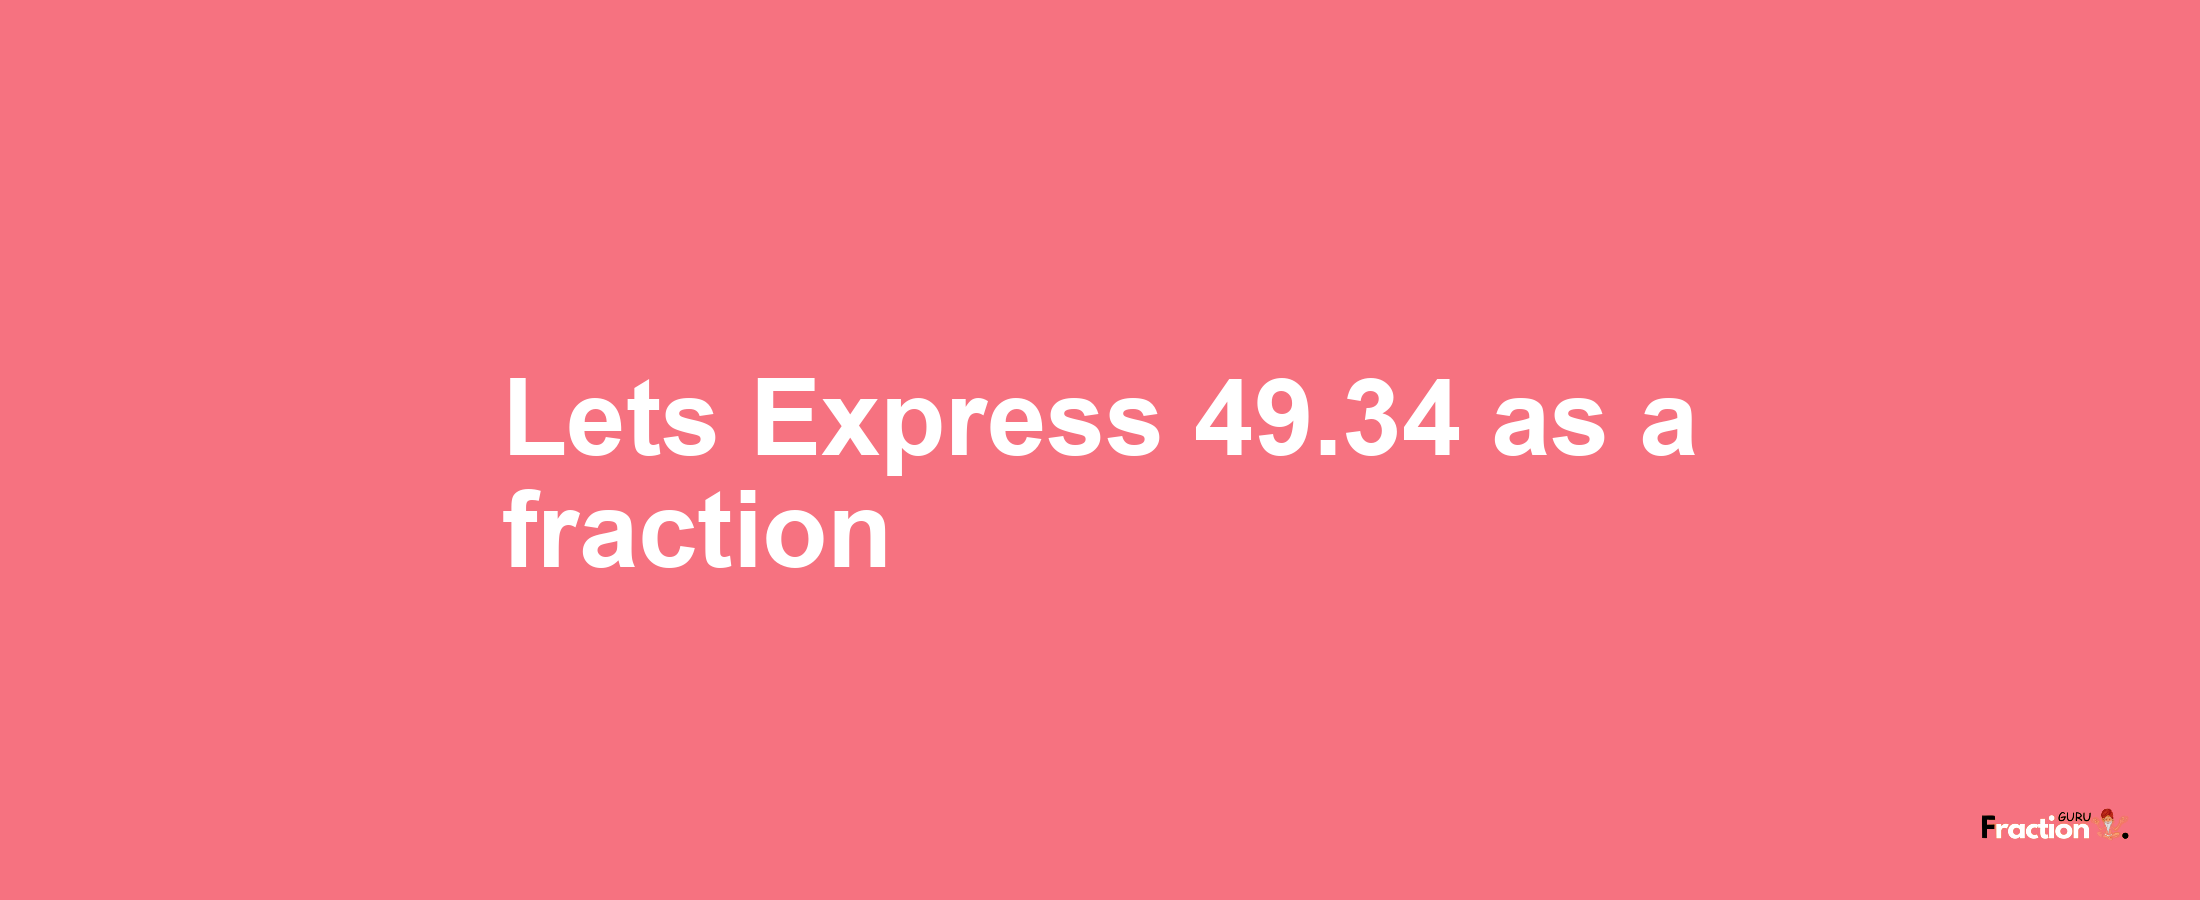 Lets Express 49.34 as afraction